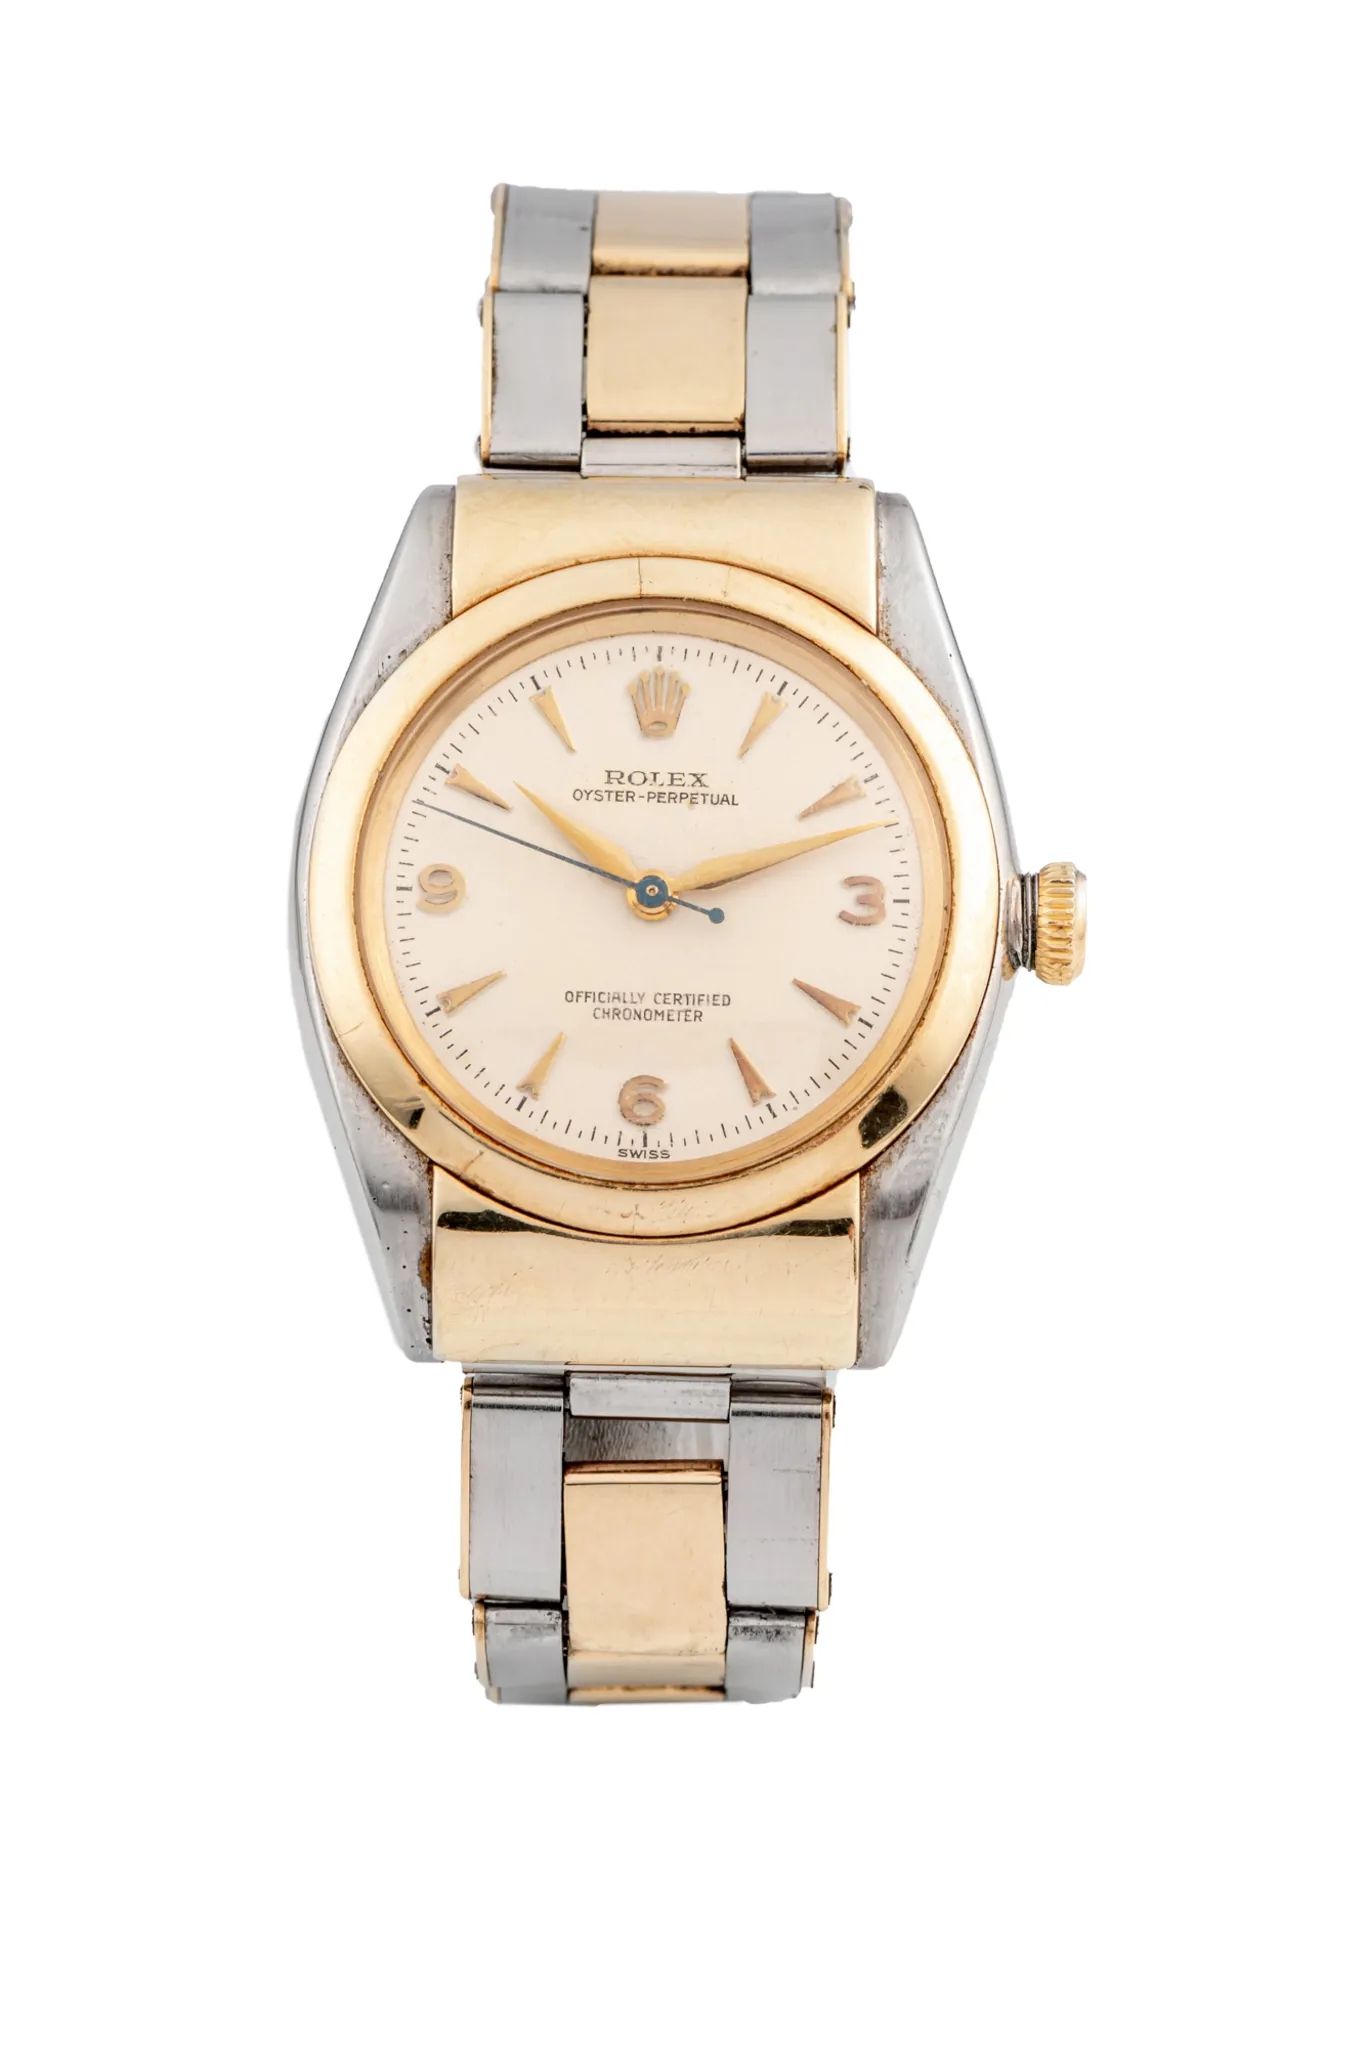 Rolex Oyster Perpetual 3065 32mm Stainless steel Champagne